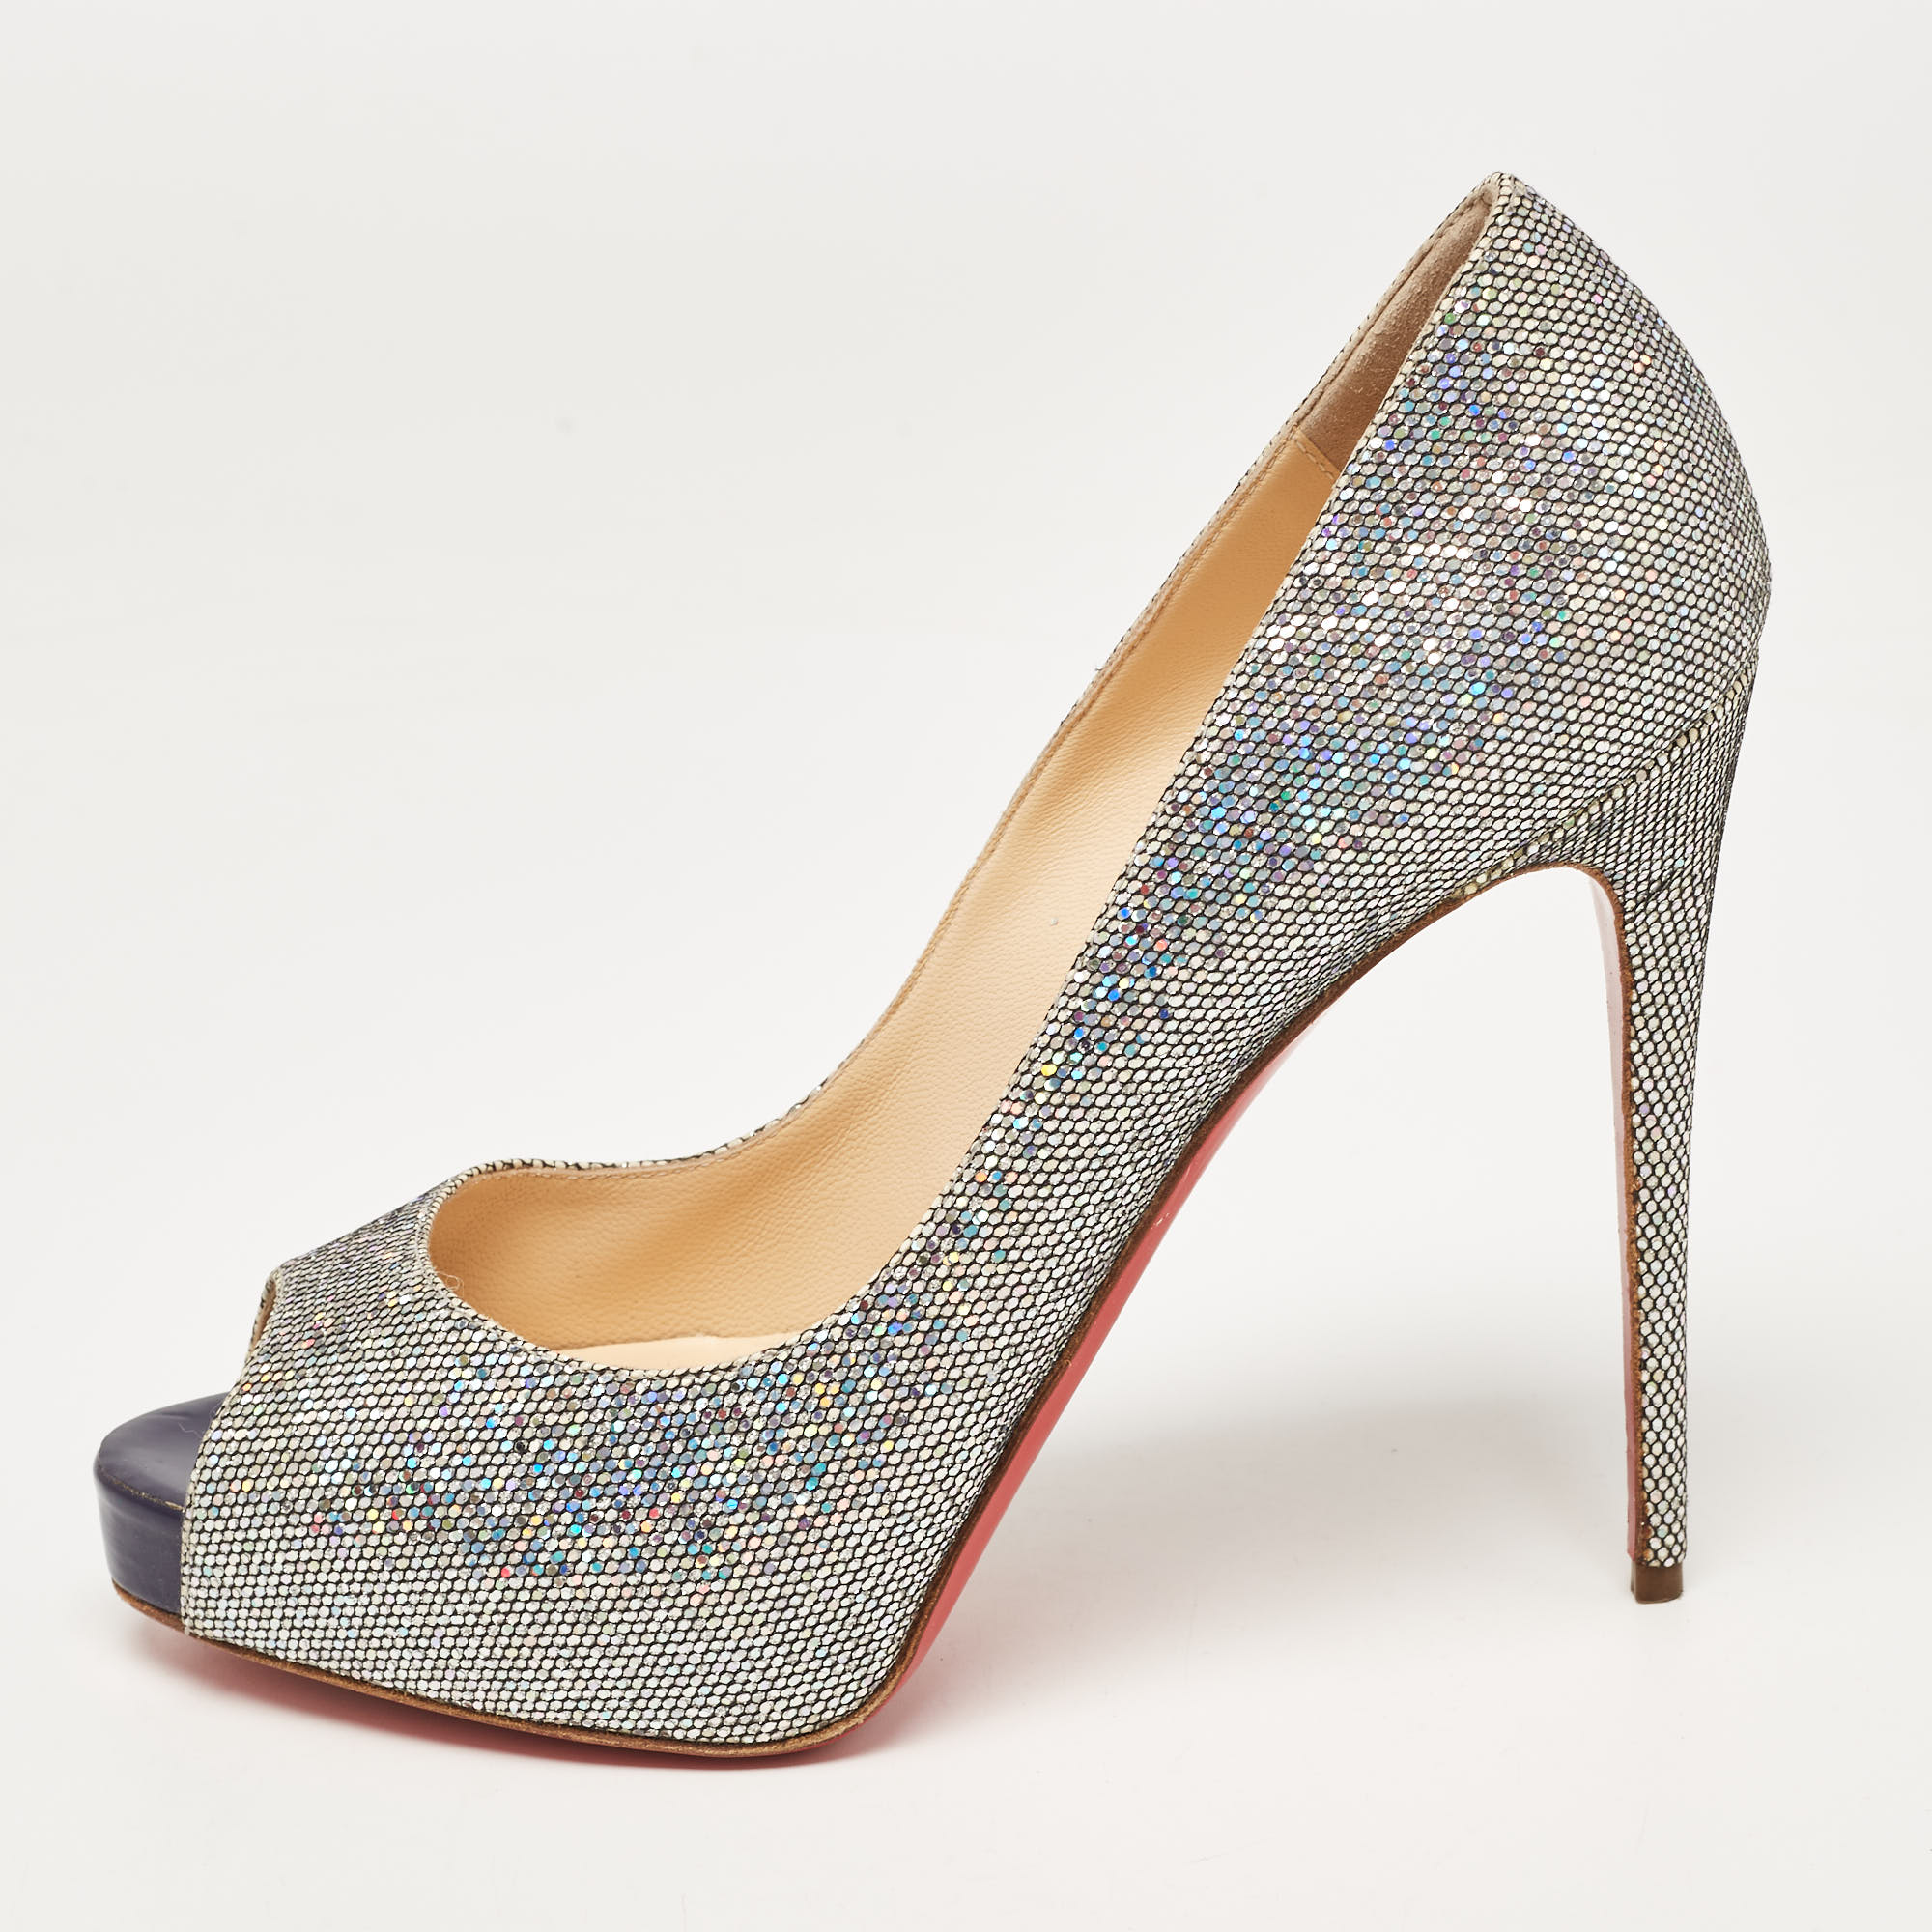 Pre-owned Christian Louboutin Metallic Glitter Fabric Disco Ball New Very Prive Pumps Size 38